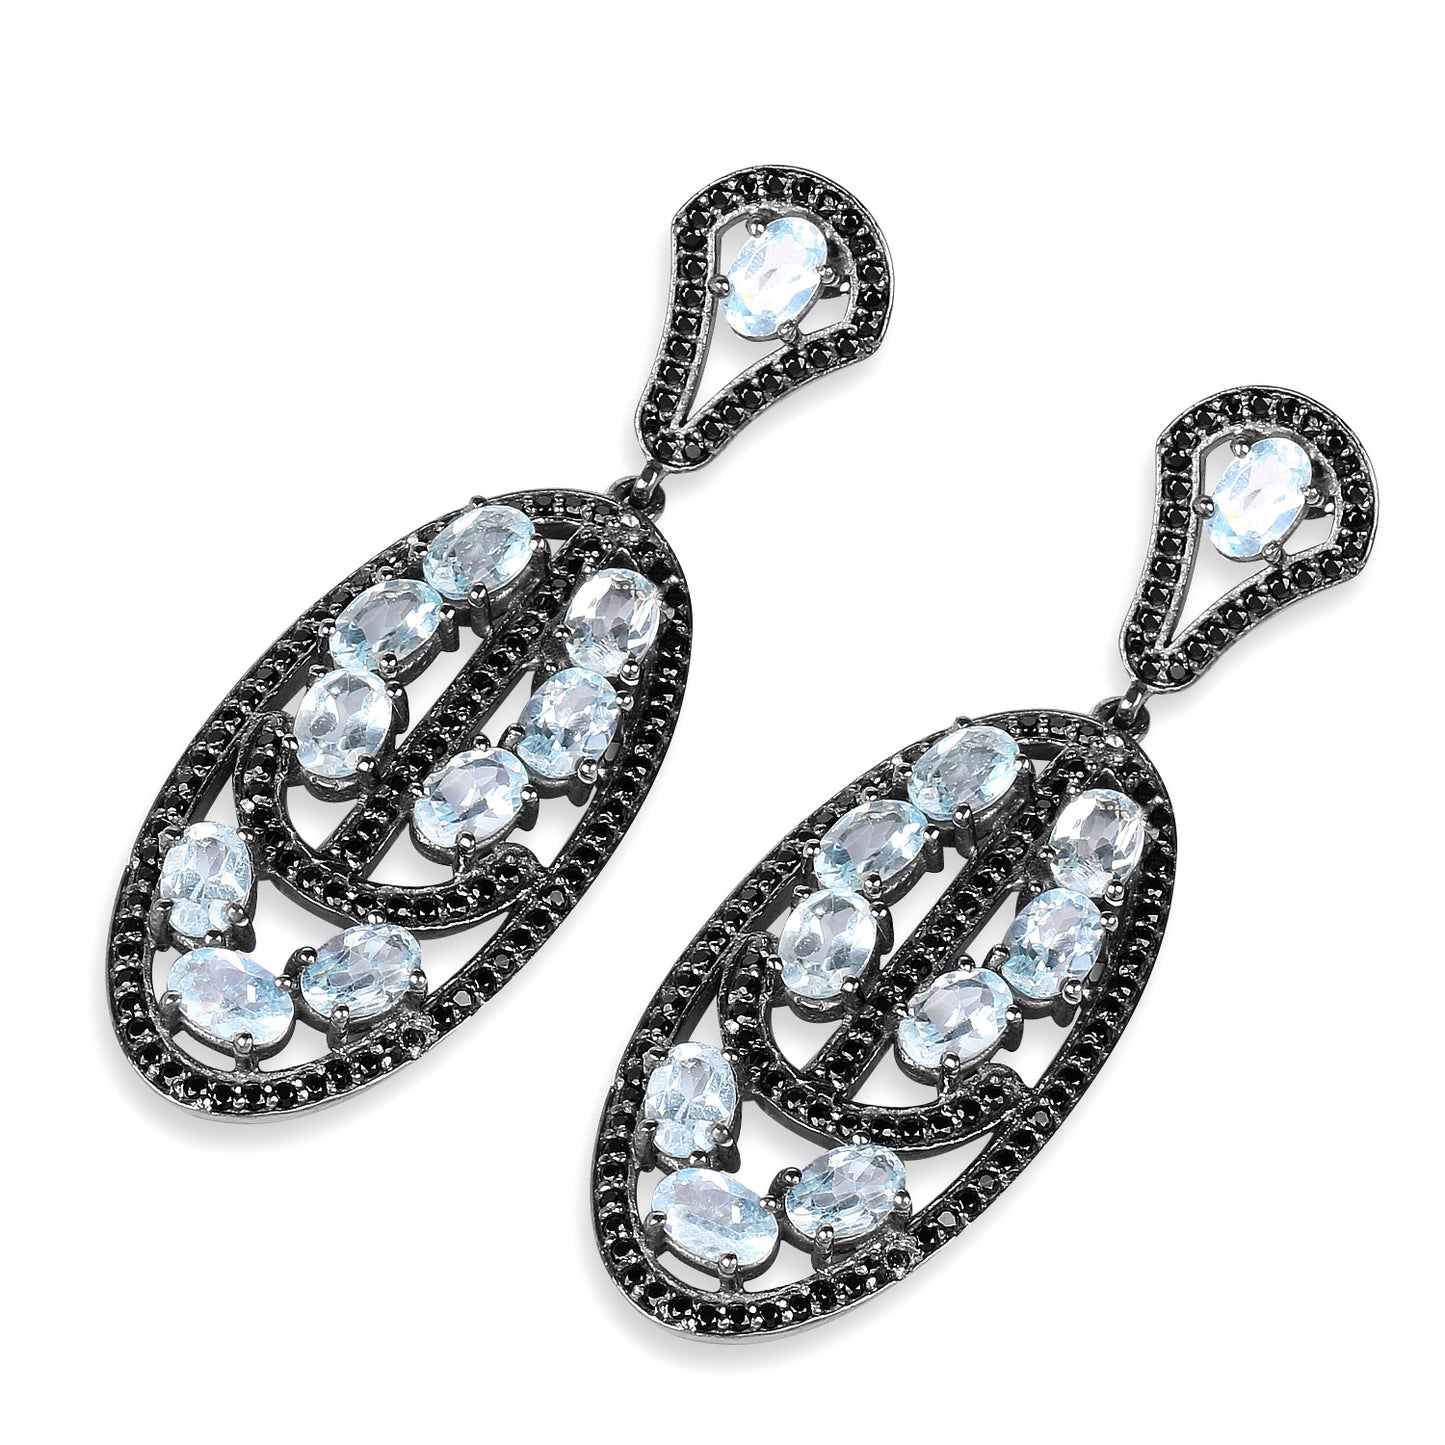 Blue Topaz Dangle Earrings With Black Spinels 13.9 Carats Rhodium Plated Silver